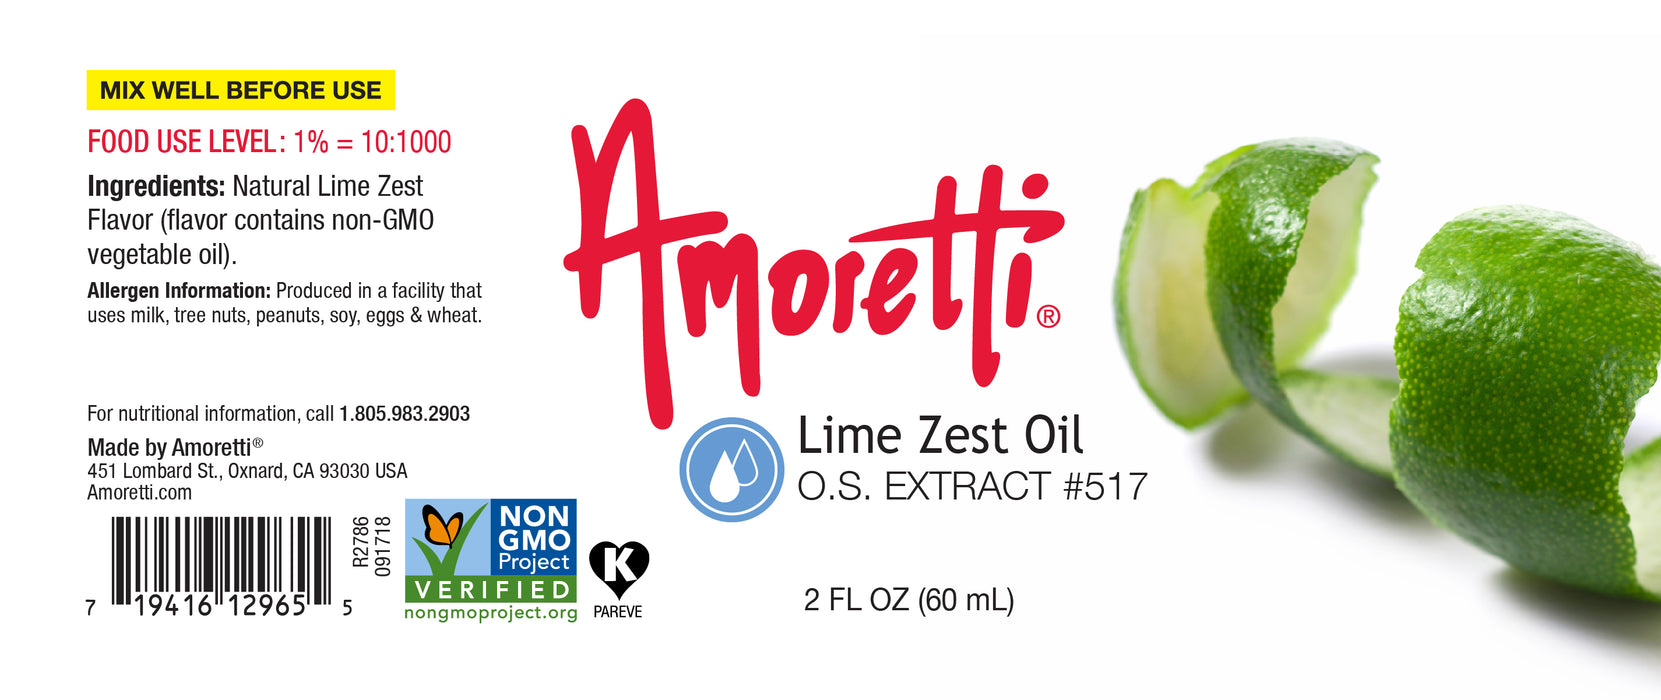 Lime Zest Oil Extract Oil Soluble